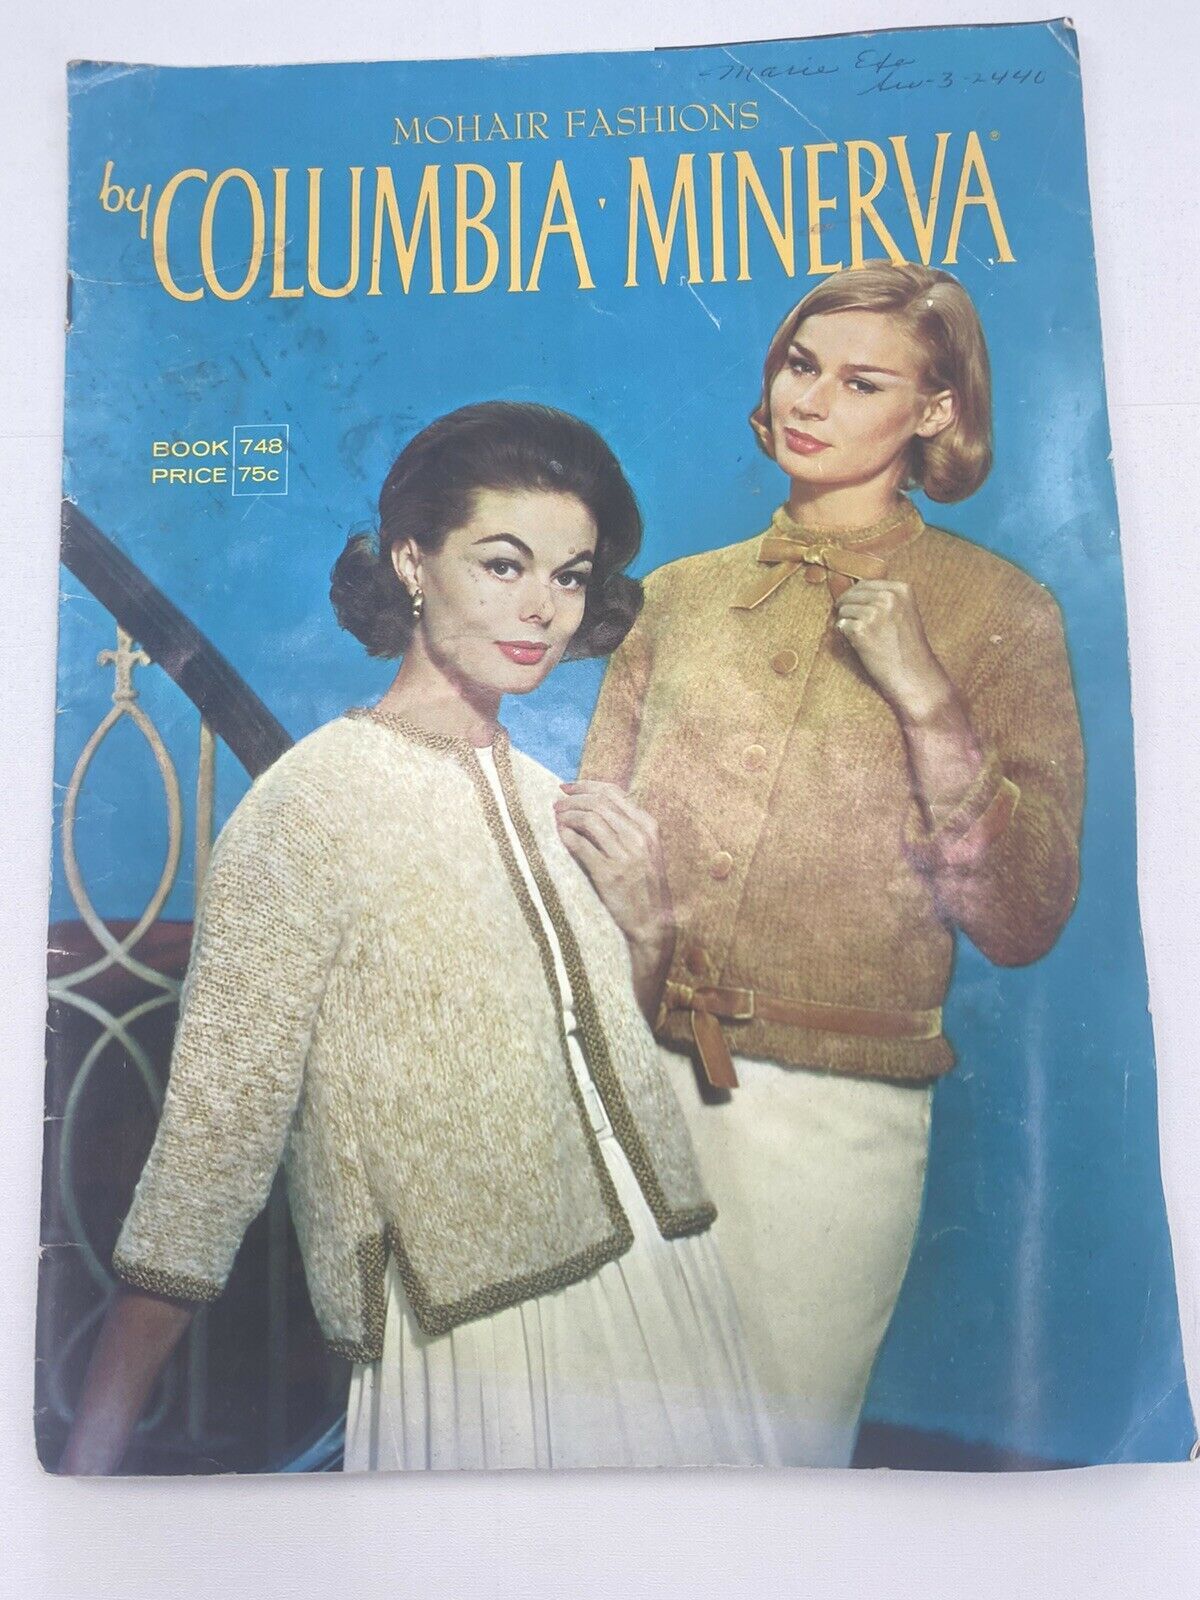 Vintage Mohair Fashions Sweaters to Knit by Columbia Minerva #748 Knitting Yarns - $12.99